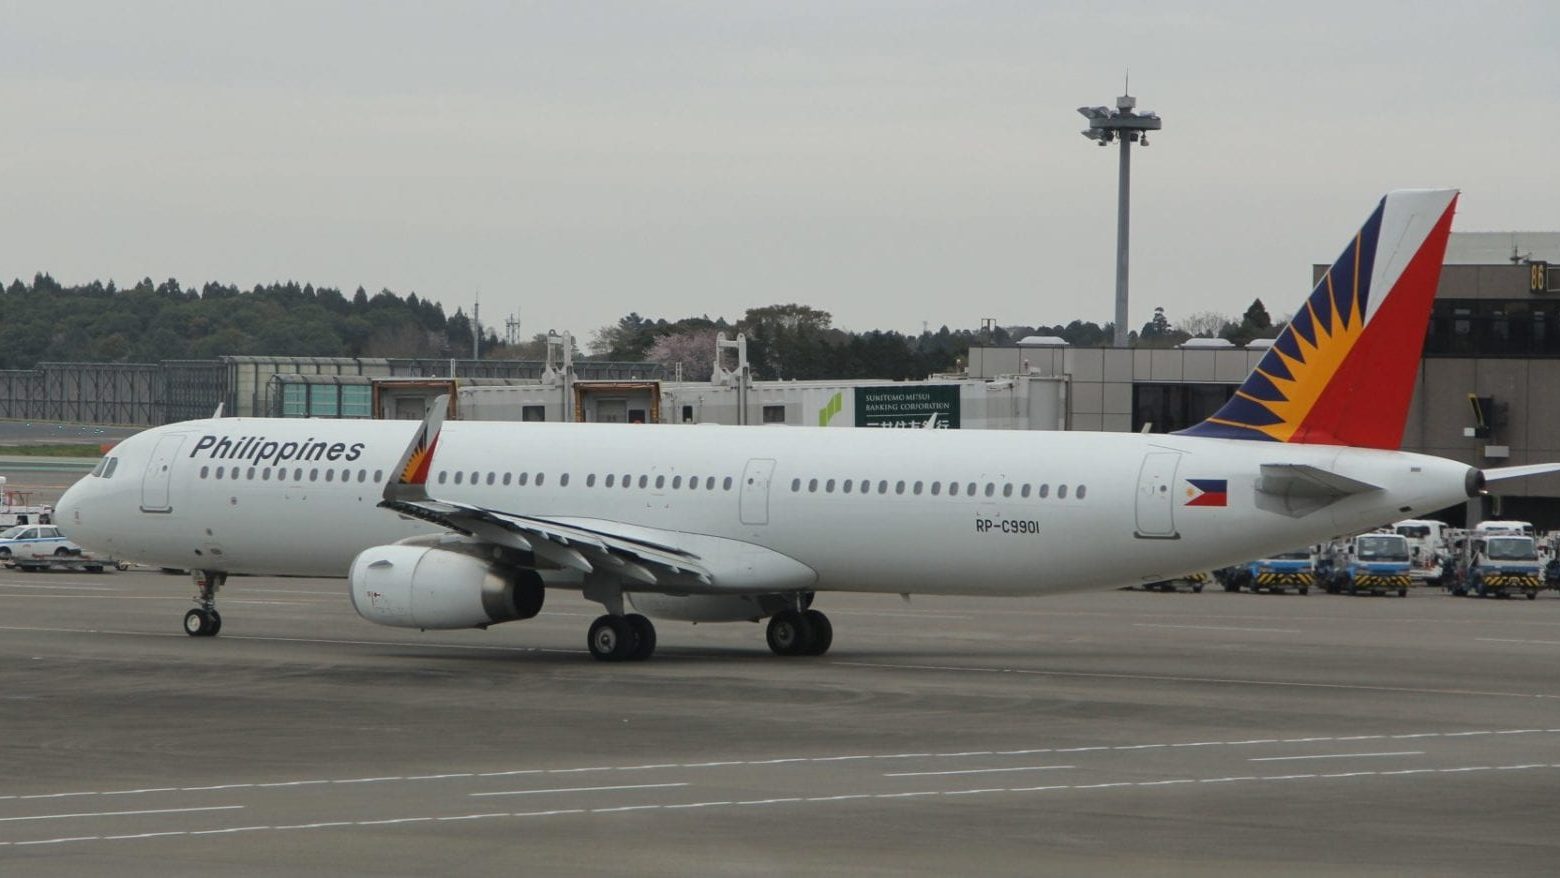 Philippine Airlines Airbus A321